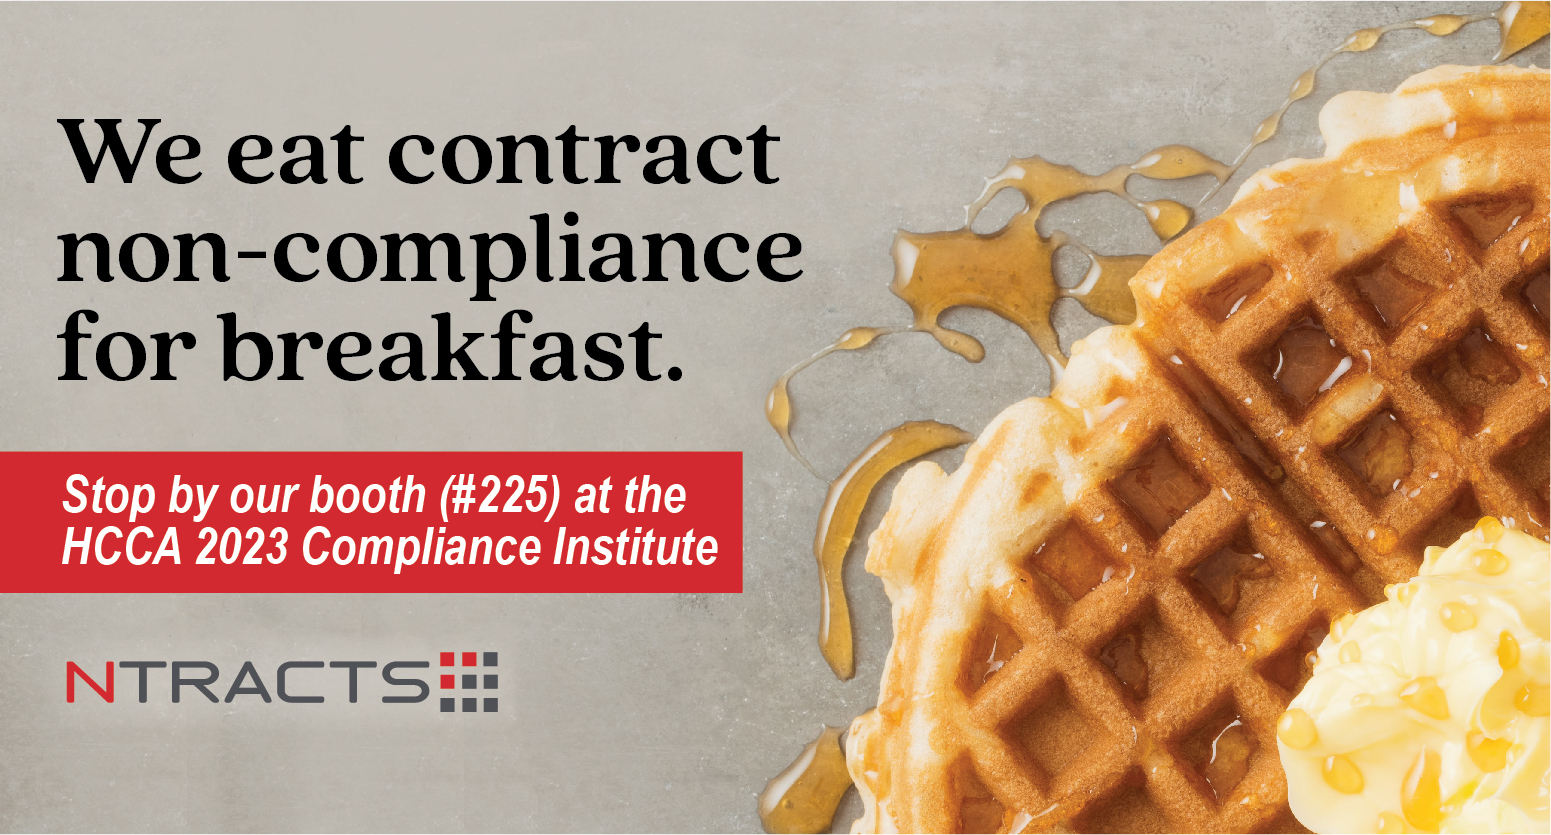 We eat contract non-compliance for breakfast